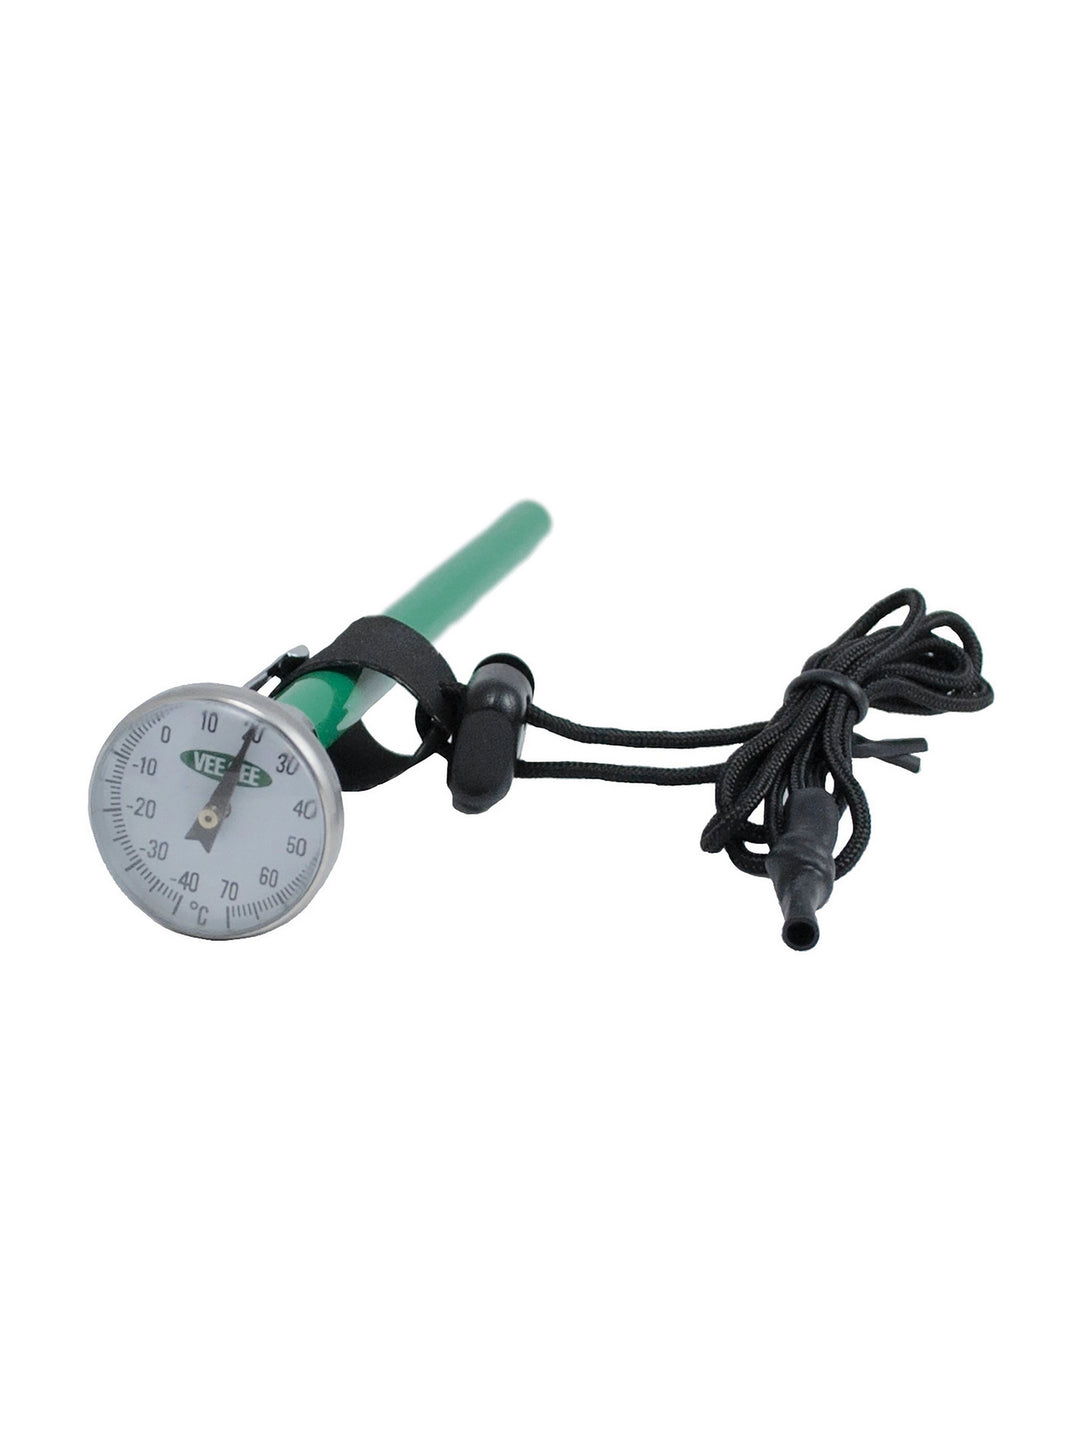 Boone Mountain Sports - ANALOG THERMOMETER